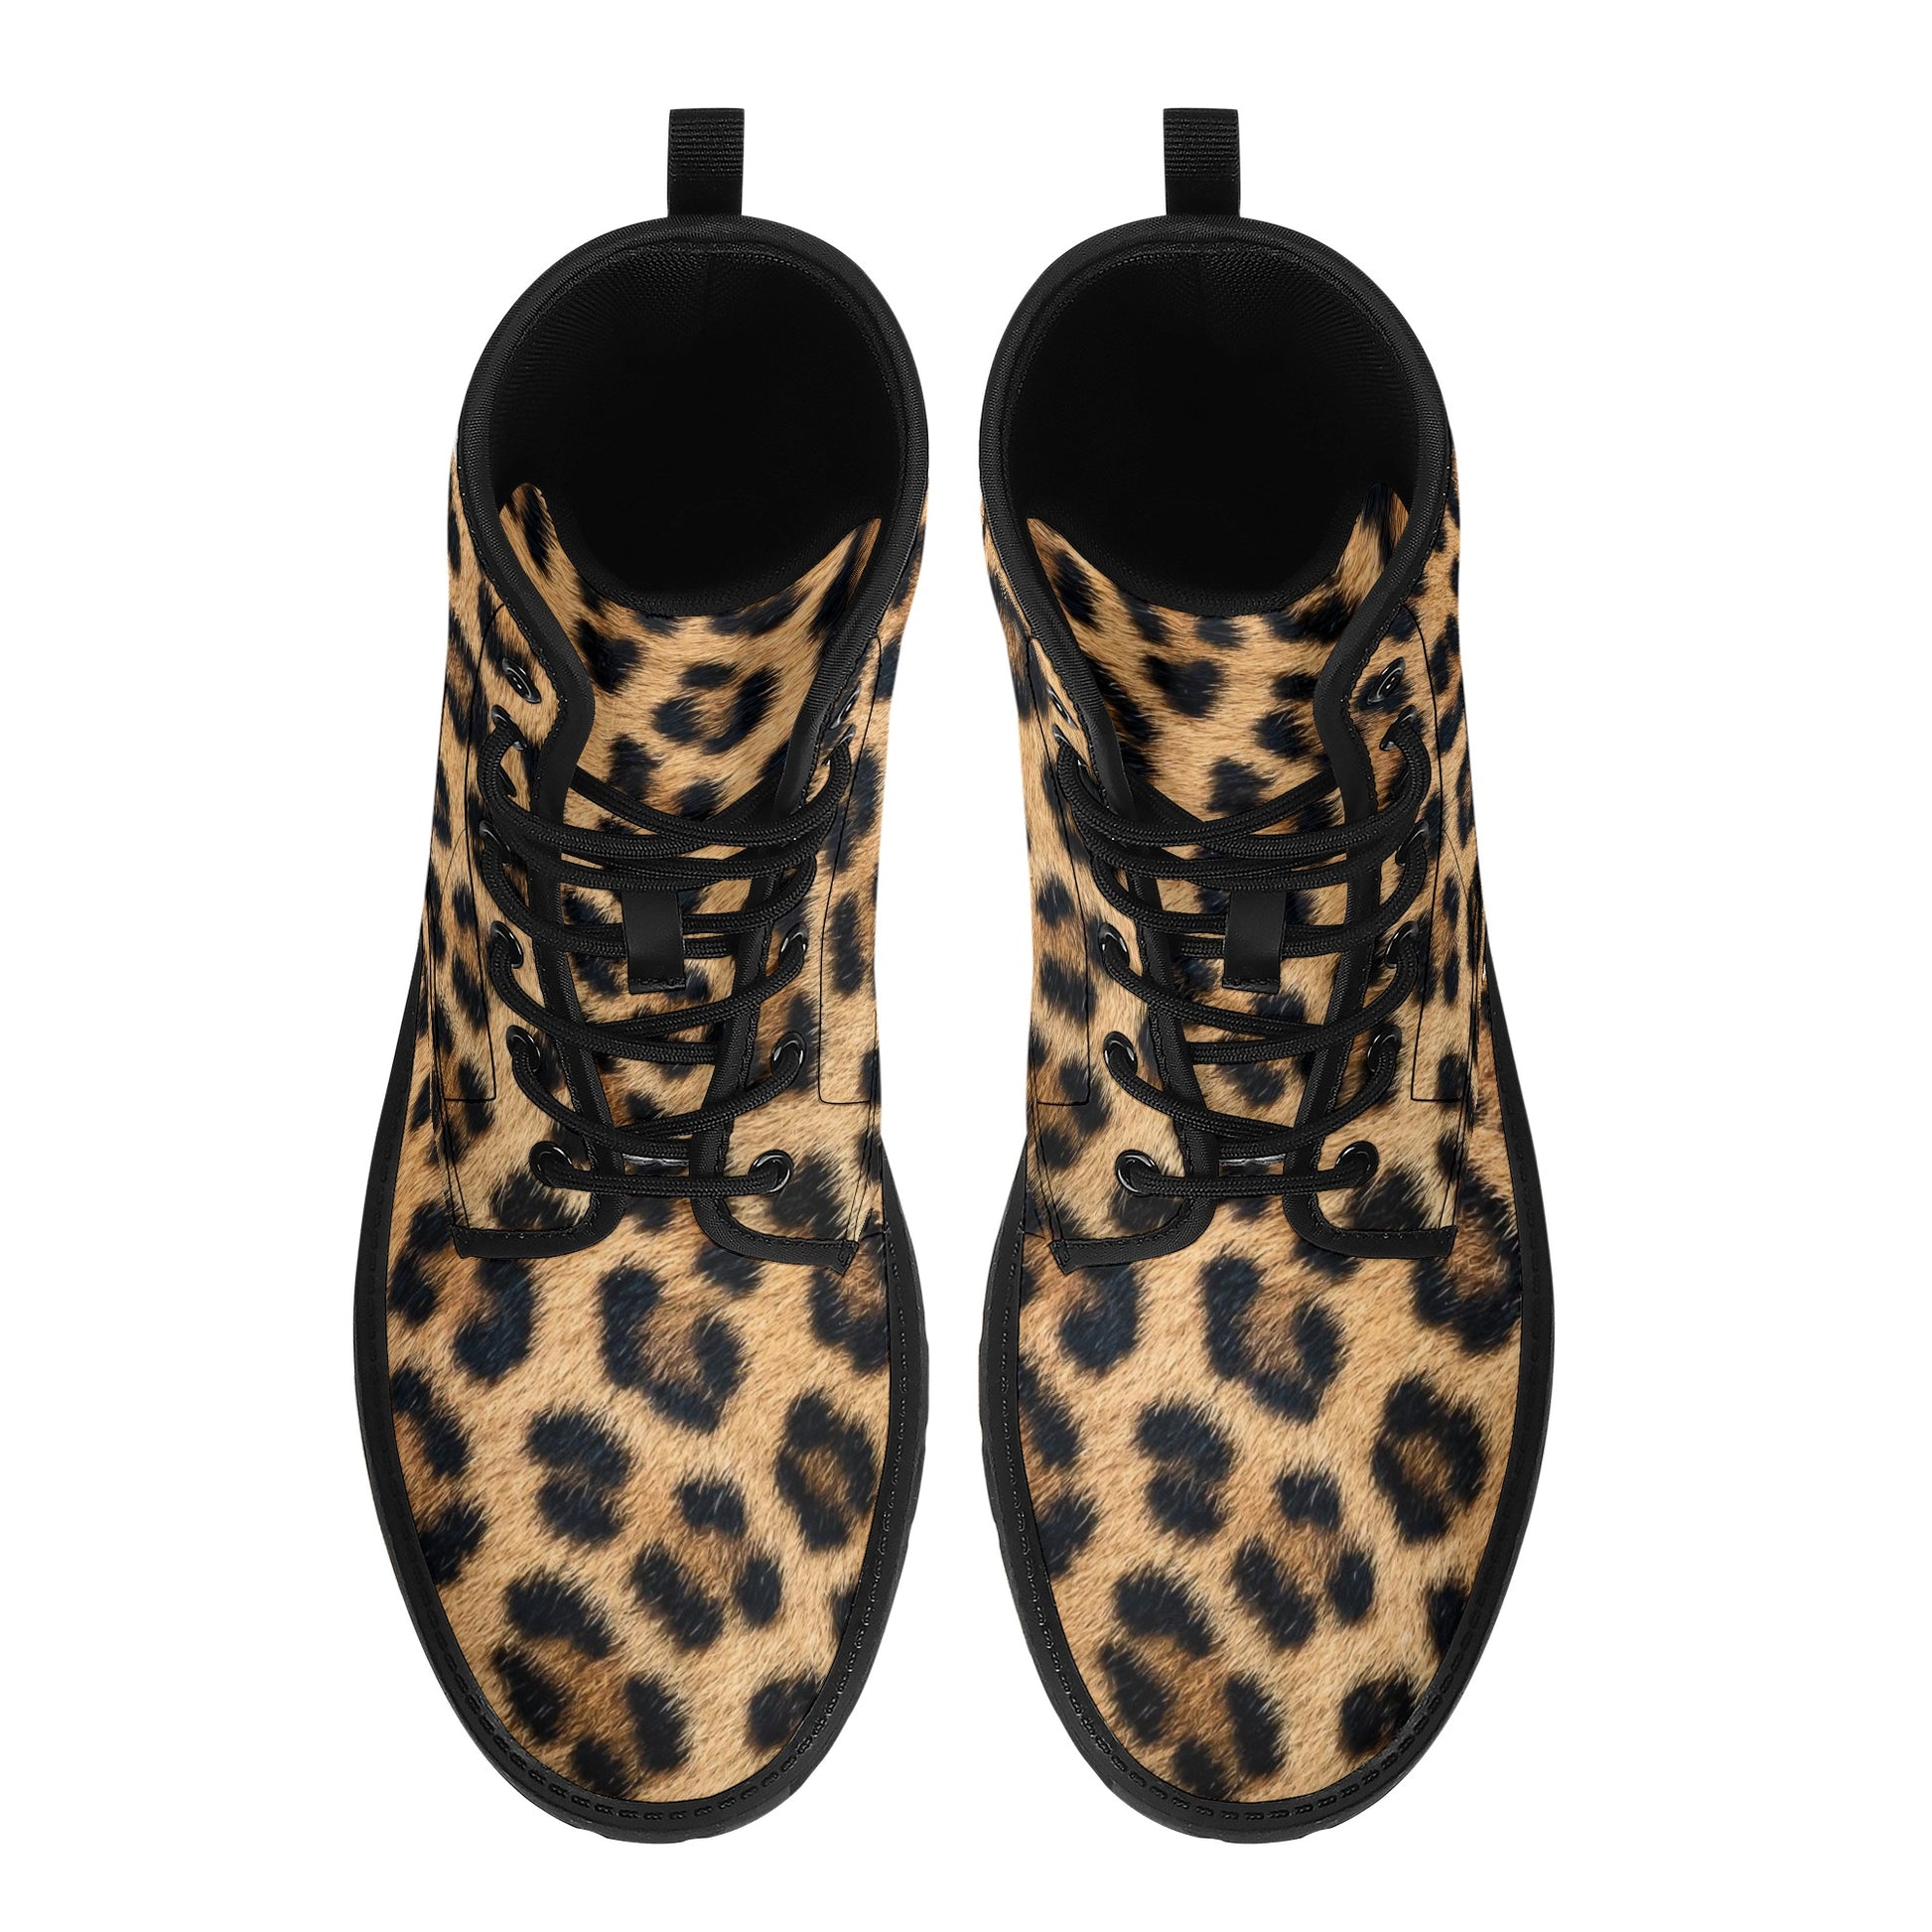 Leopard Print Women Leather Boots, Animal Cheetah Vegan Lace Up Shoes Hiking Festival Black Ankle Combat Work Winter Waterproof Custom Gift Starcove Fashion